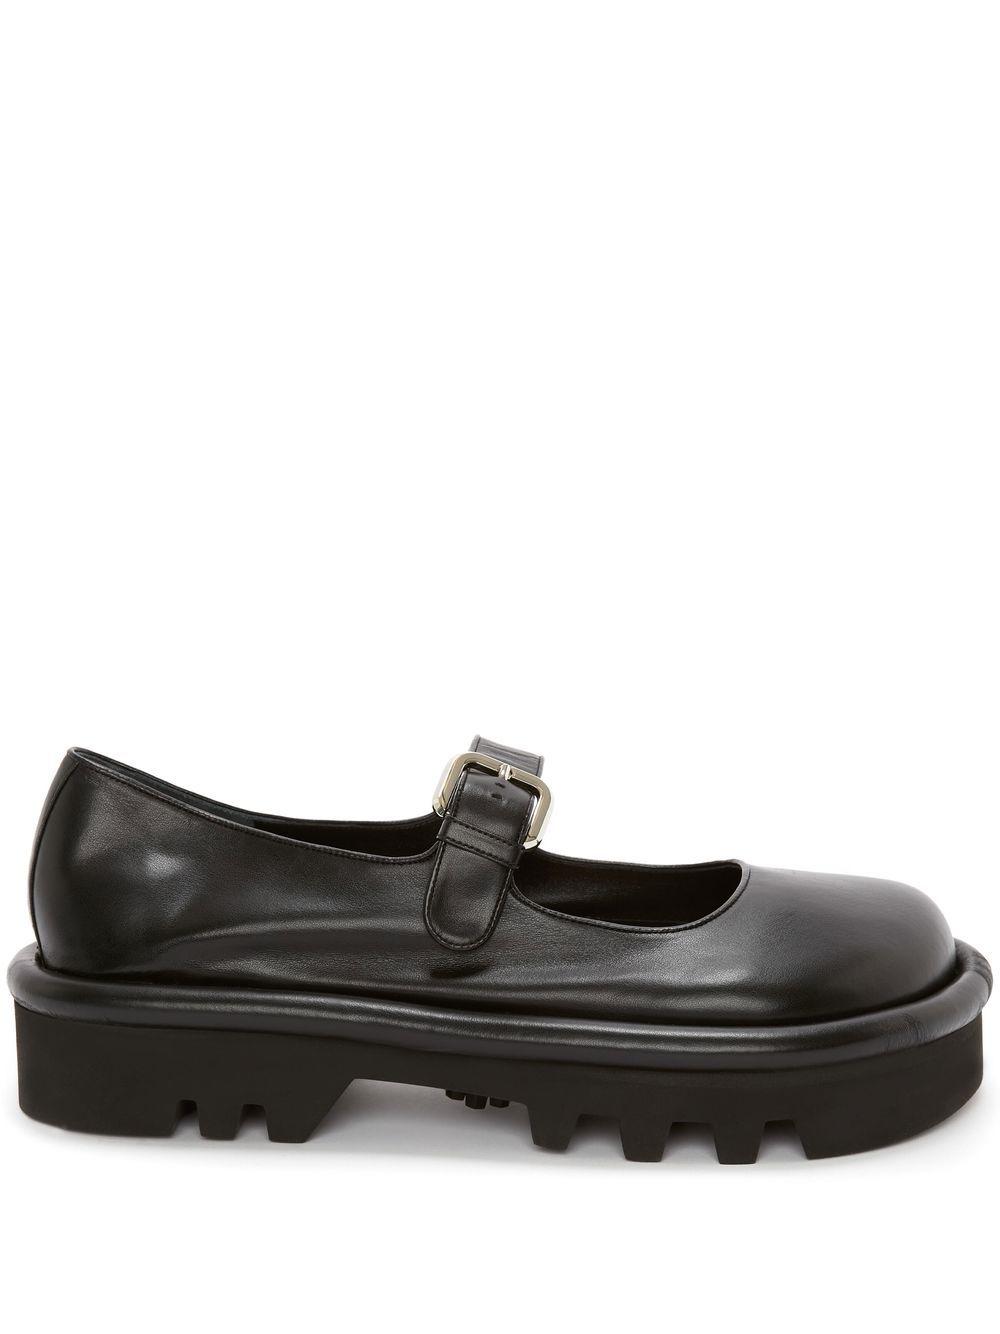 JW Anderson Bumper-tube Leather Chunky Mary Janes in Black | Lyst Australia